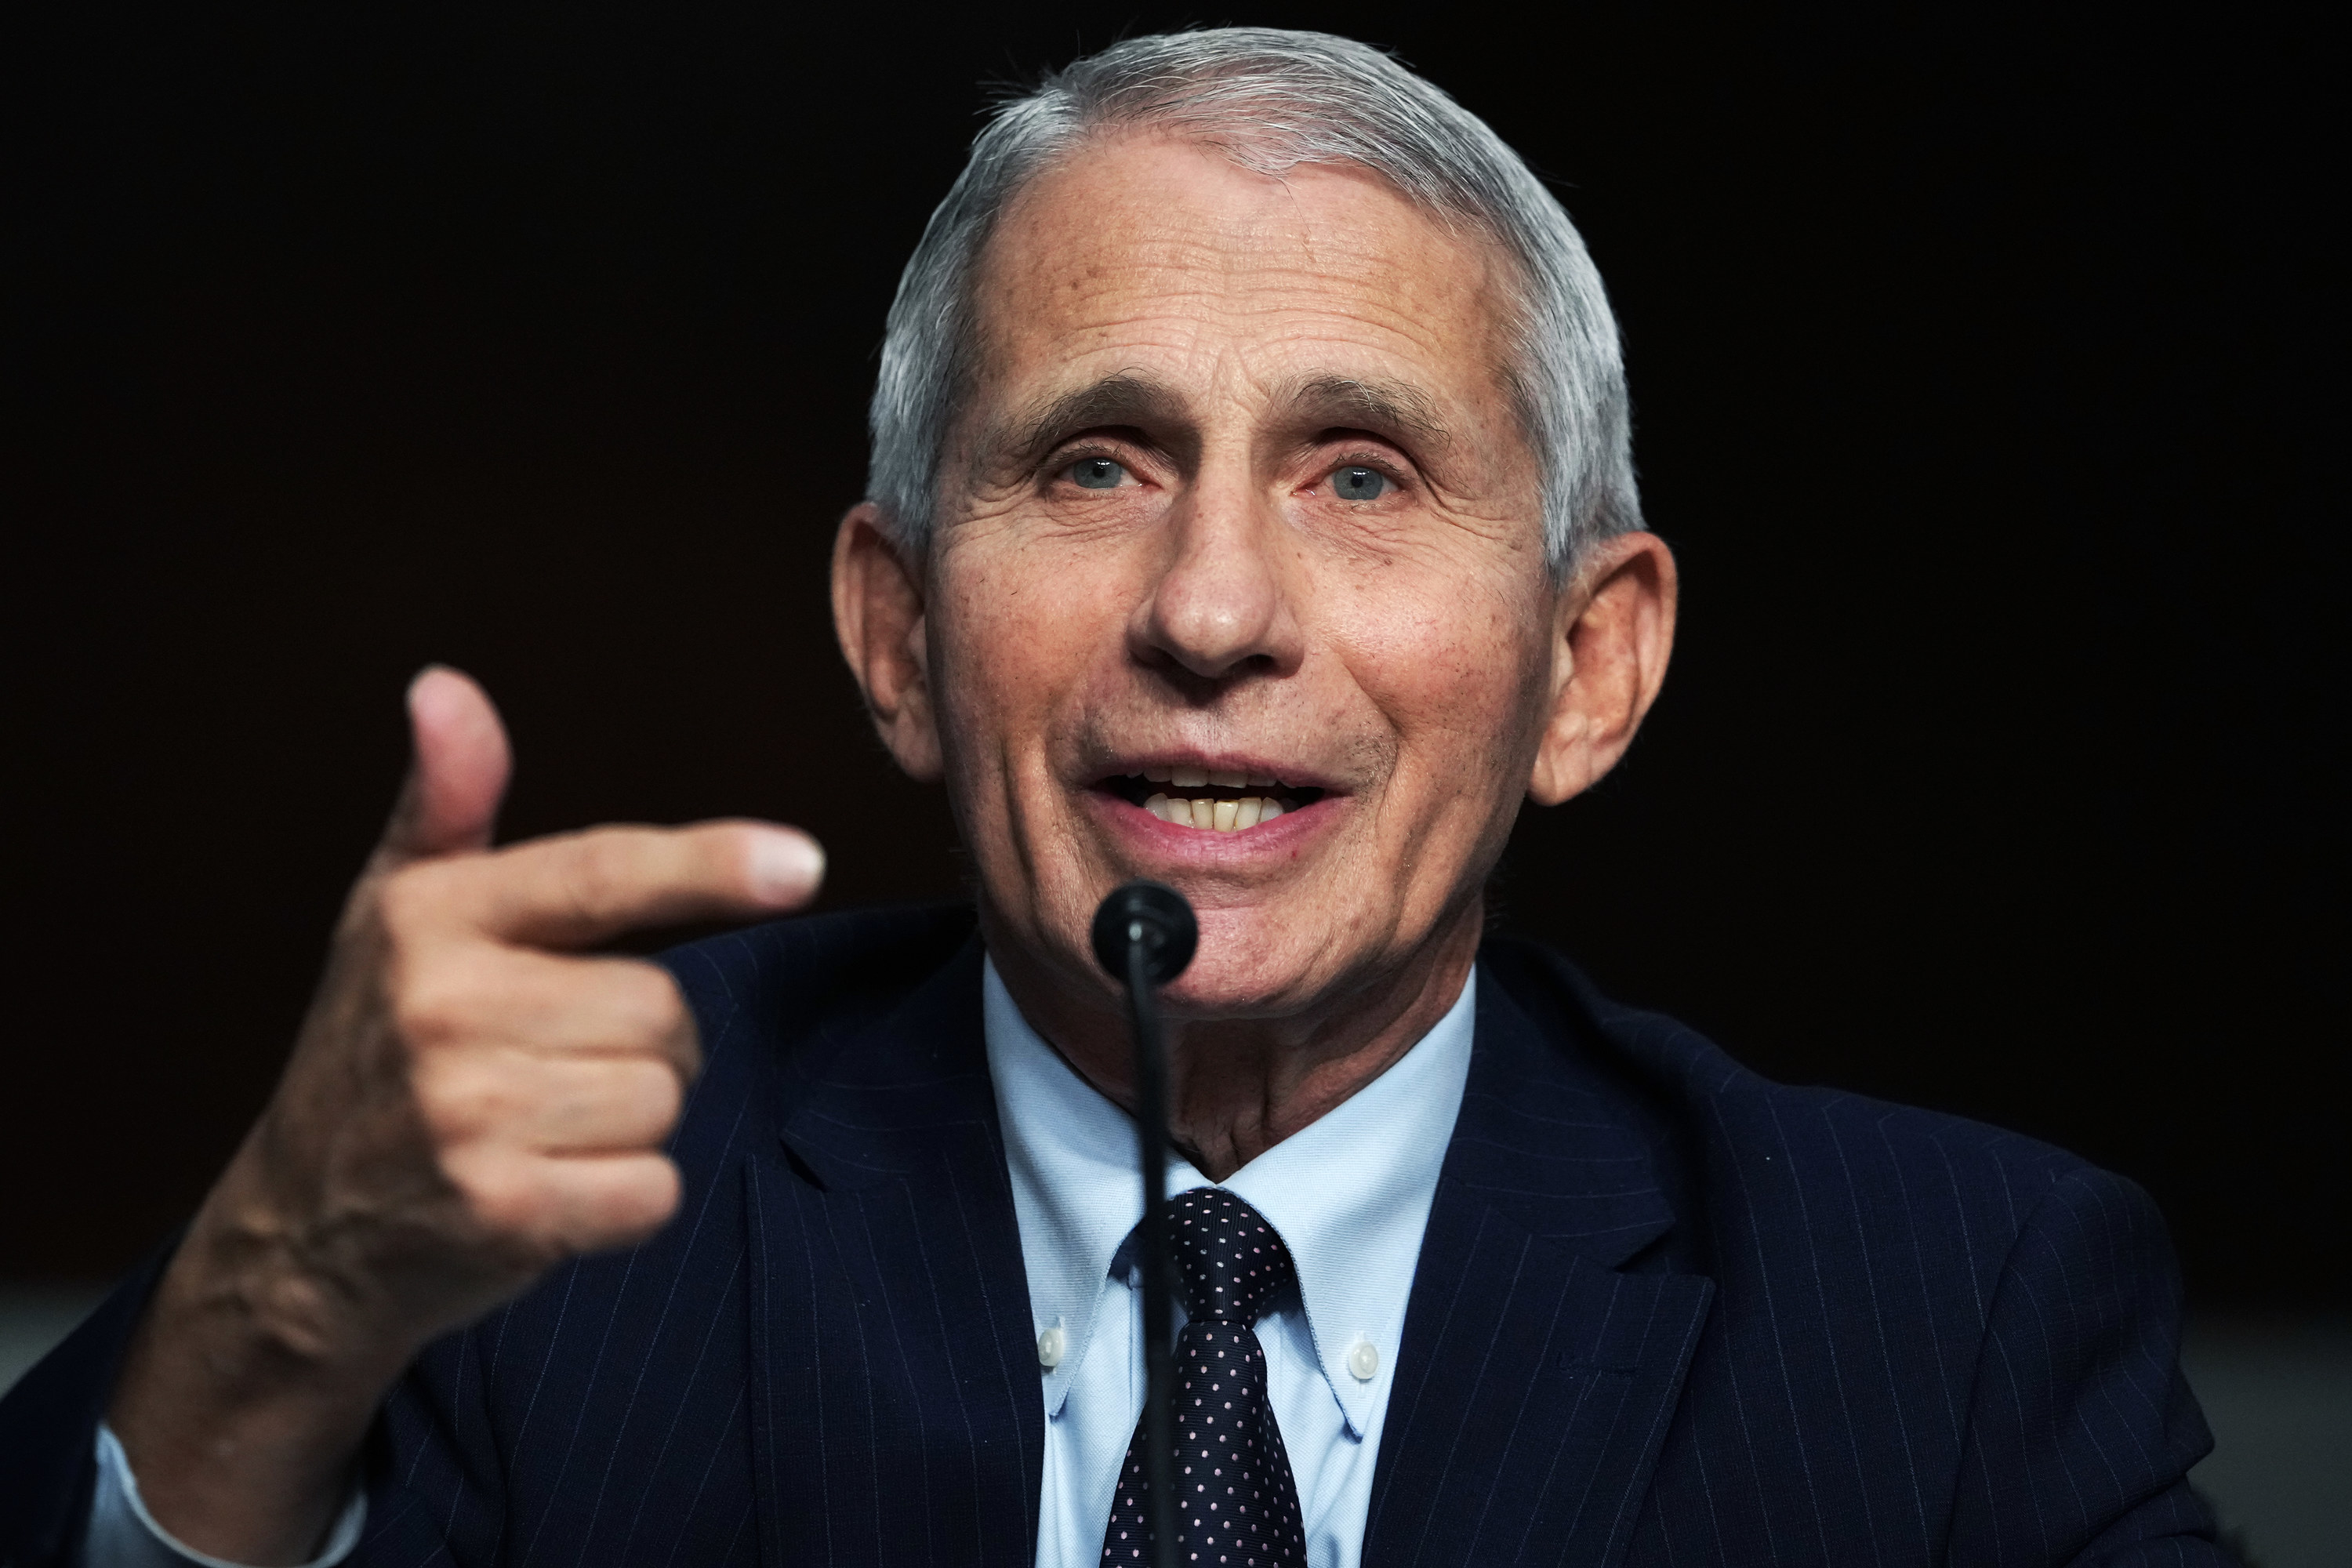 Dr. Anthony Fauci, director of the National Institute of Allergy and Infectious Diseases, testifies during the Senate Health, Education, Labor and Pensions Committee